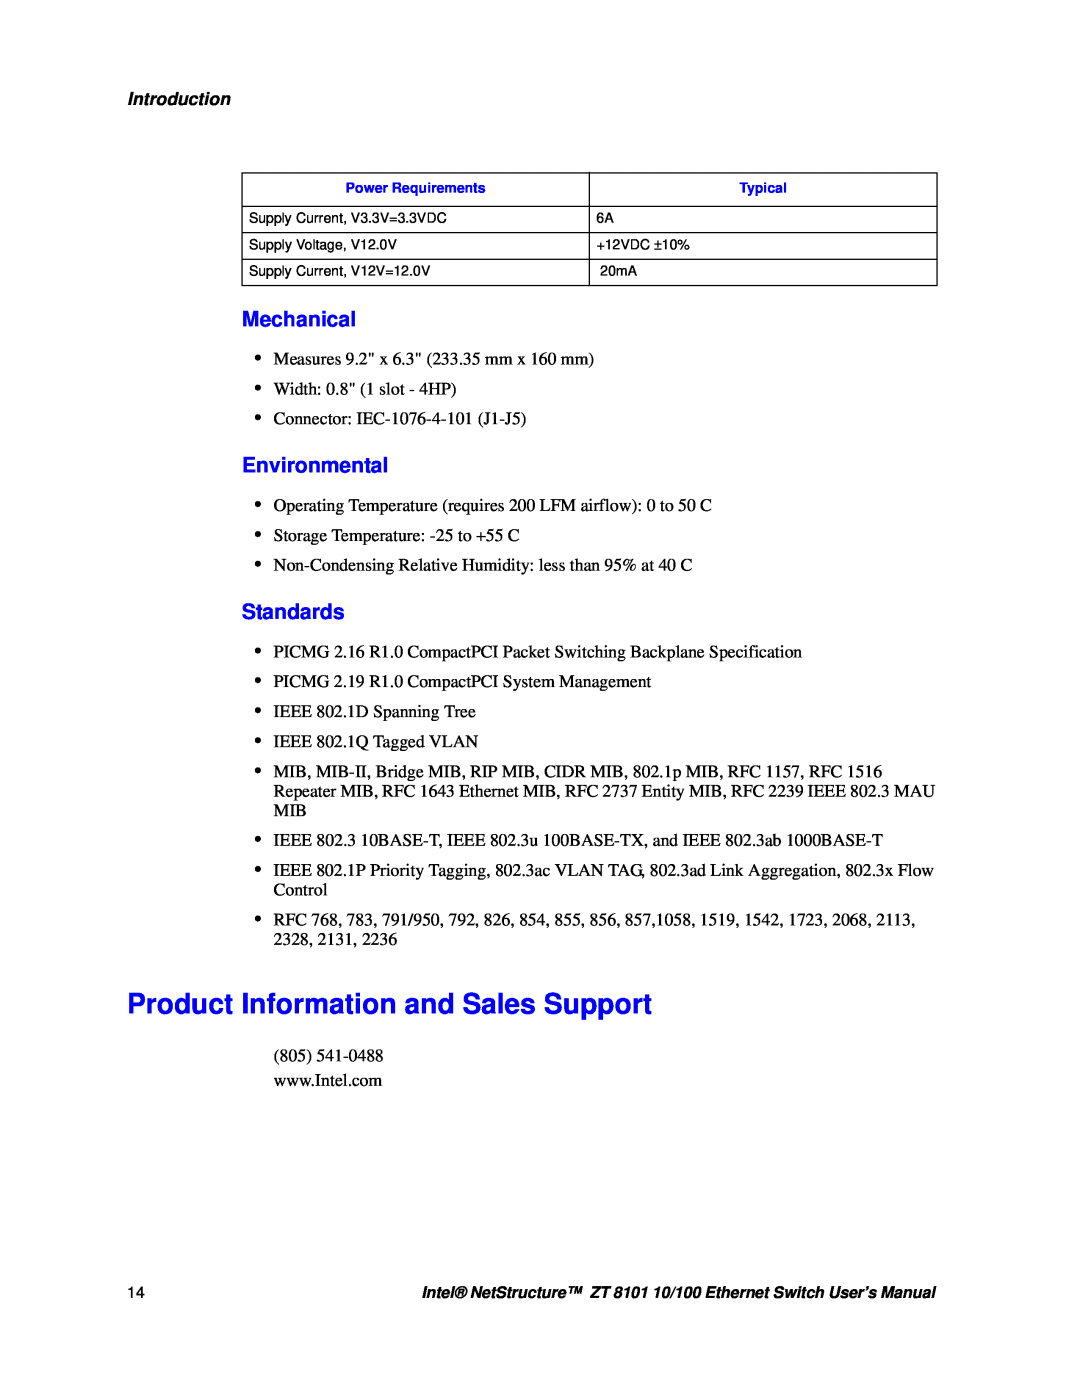 Intel ZT 8101 10/100 user manual Product Information and Sales Support, Mechanical, Environmental, Standards, Introduction 